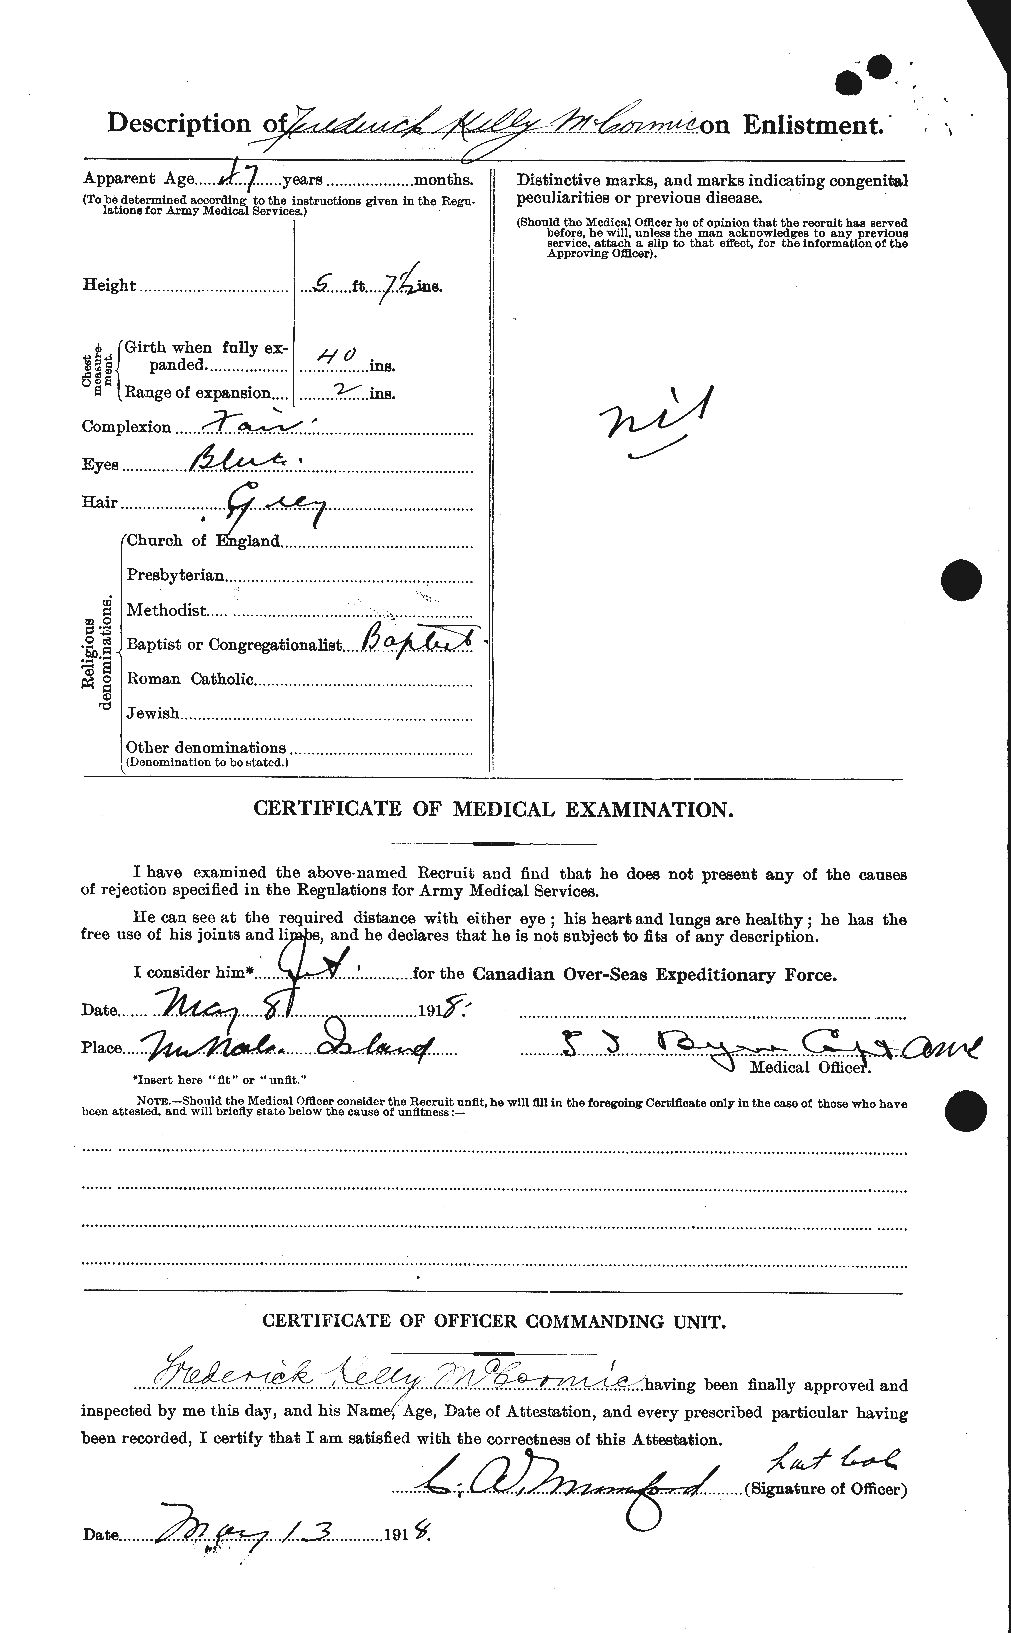 Personnel Records of the First World War - CEF 133836b